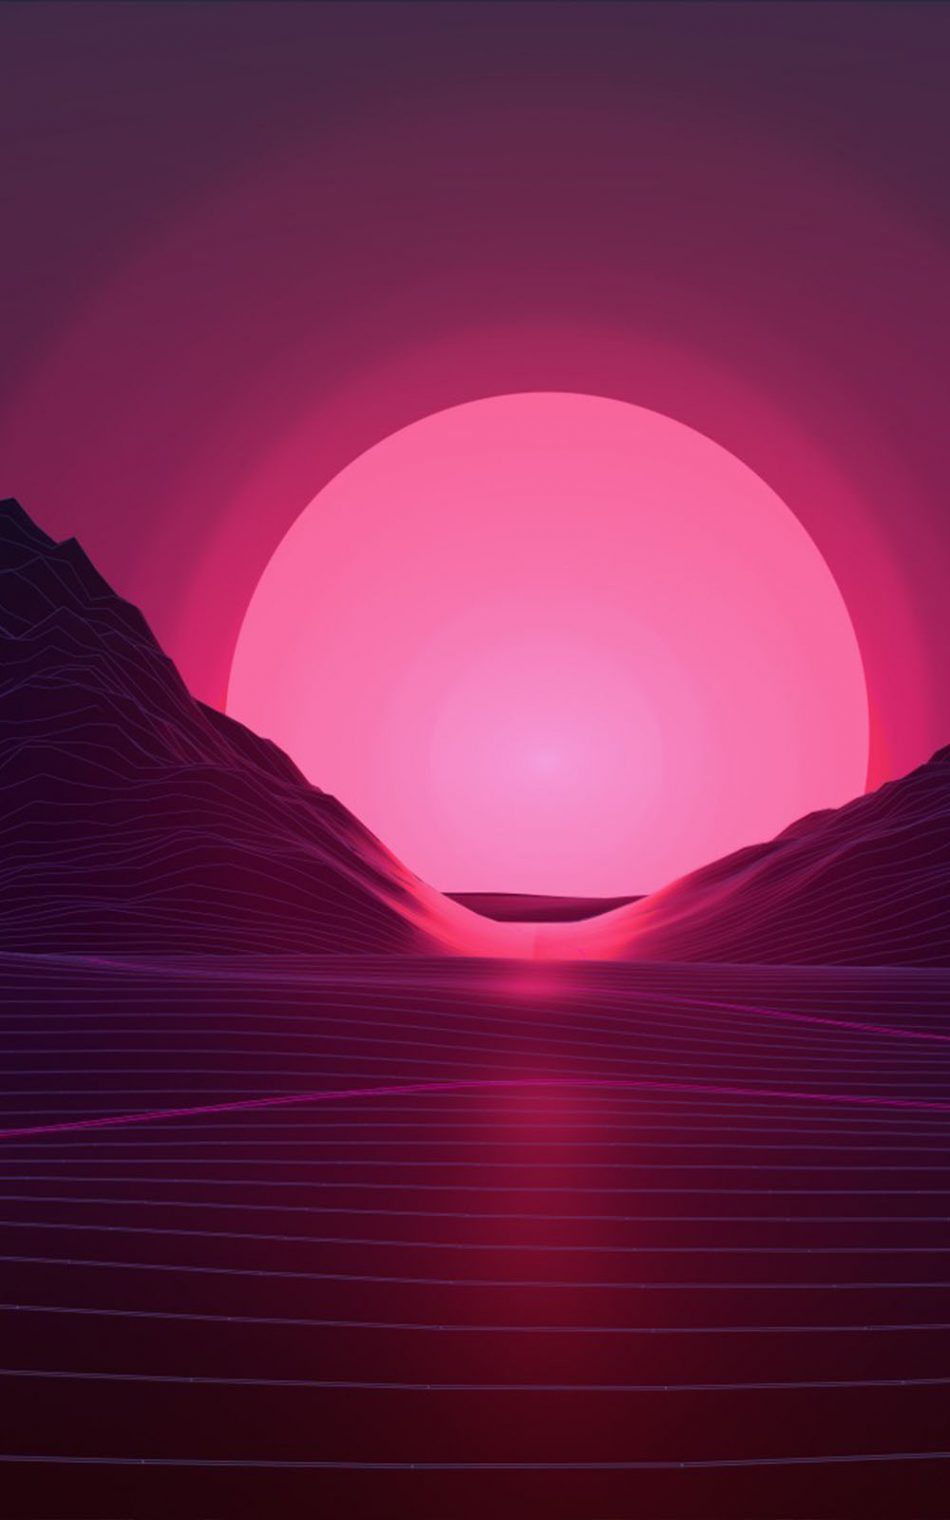 Neon Pink Sunset Artwork Hd Mobile Wallpapers